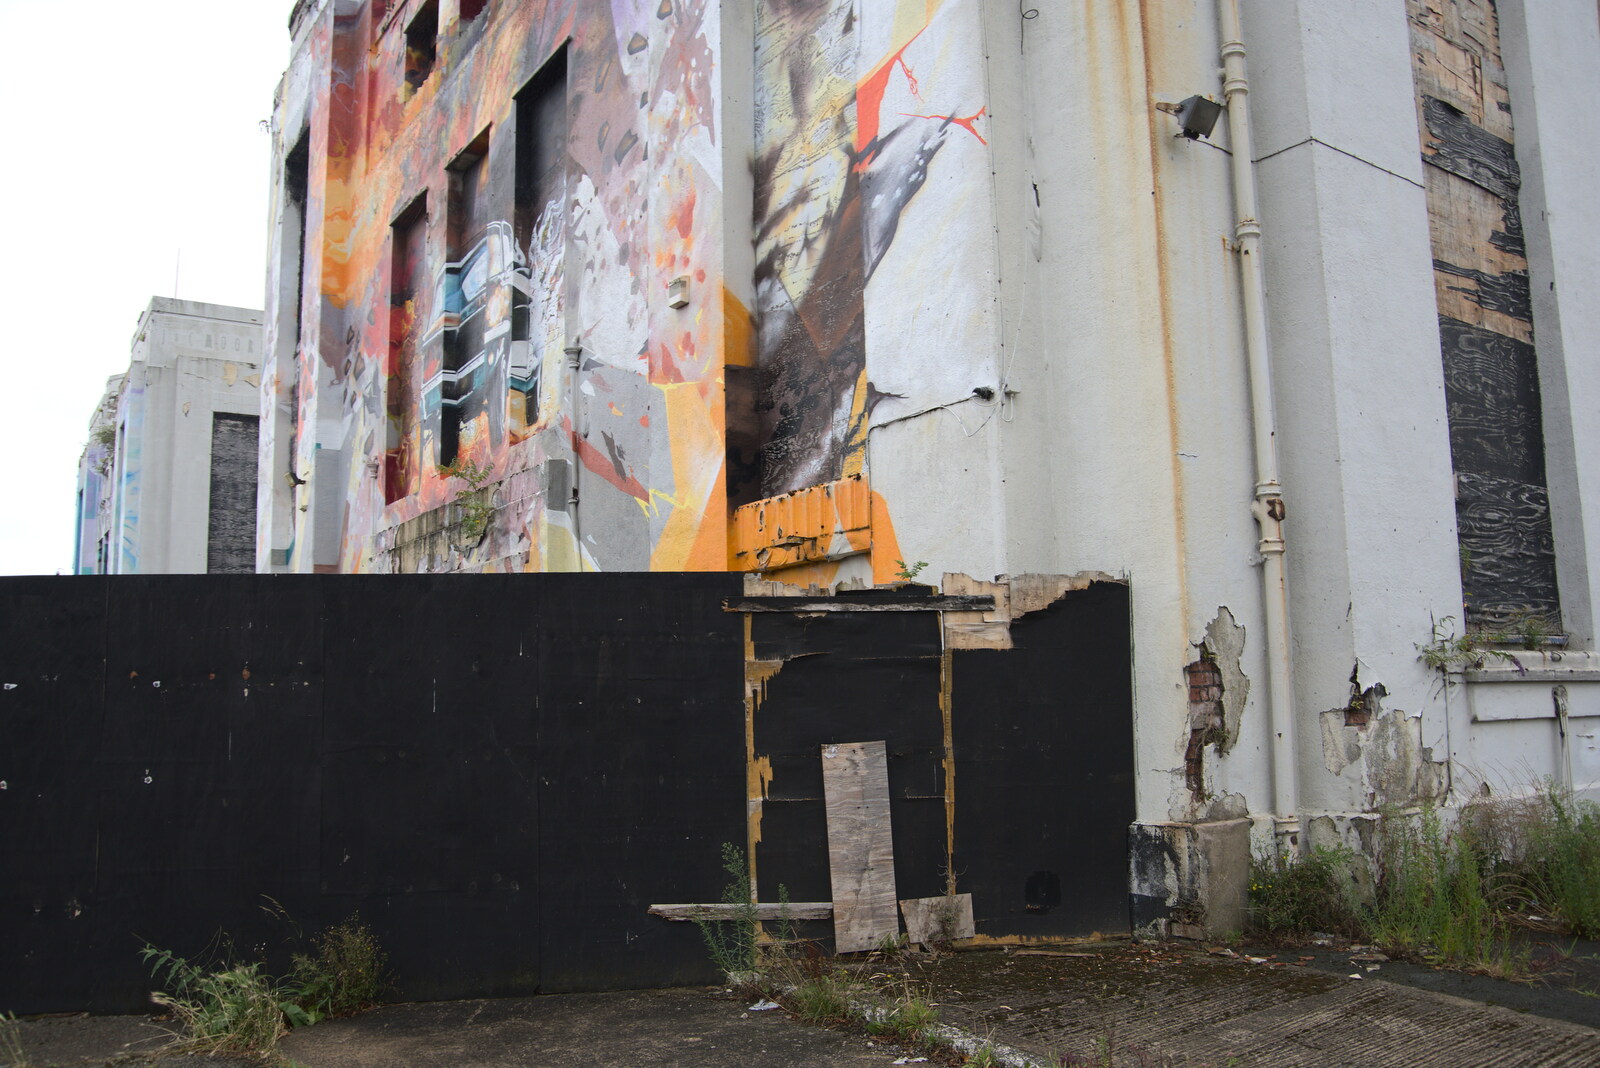 Bright graffiti from Pork Pies and Dockside Dereliction, Melton Mowbray and Liverpool - 7th August 2021